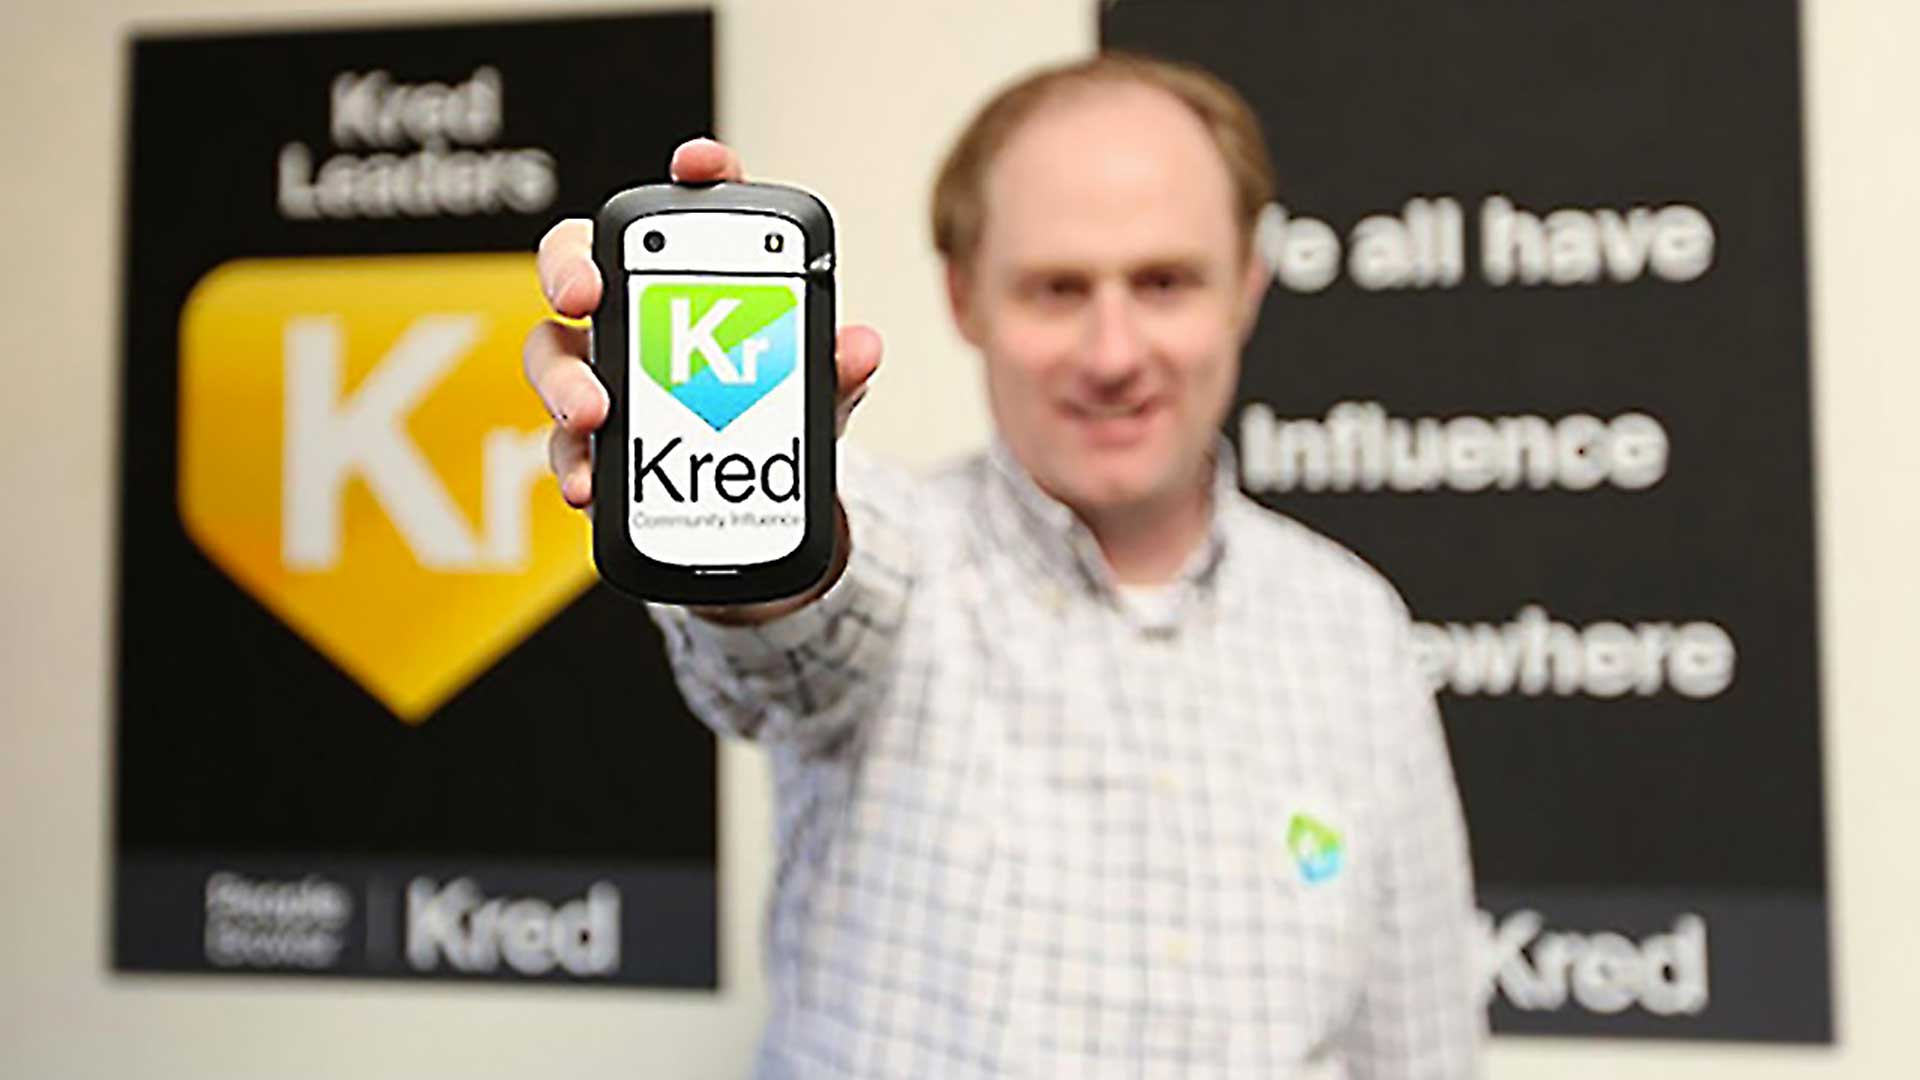 10 Questions With Andrew Grill, The CEO Of KRED